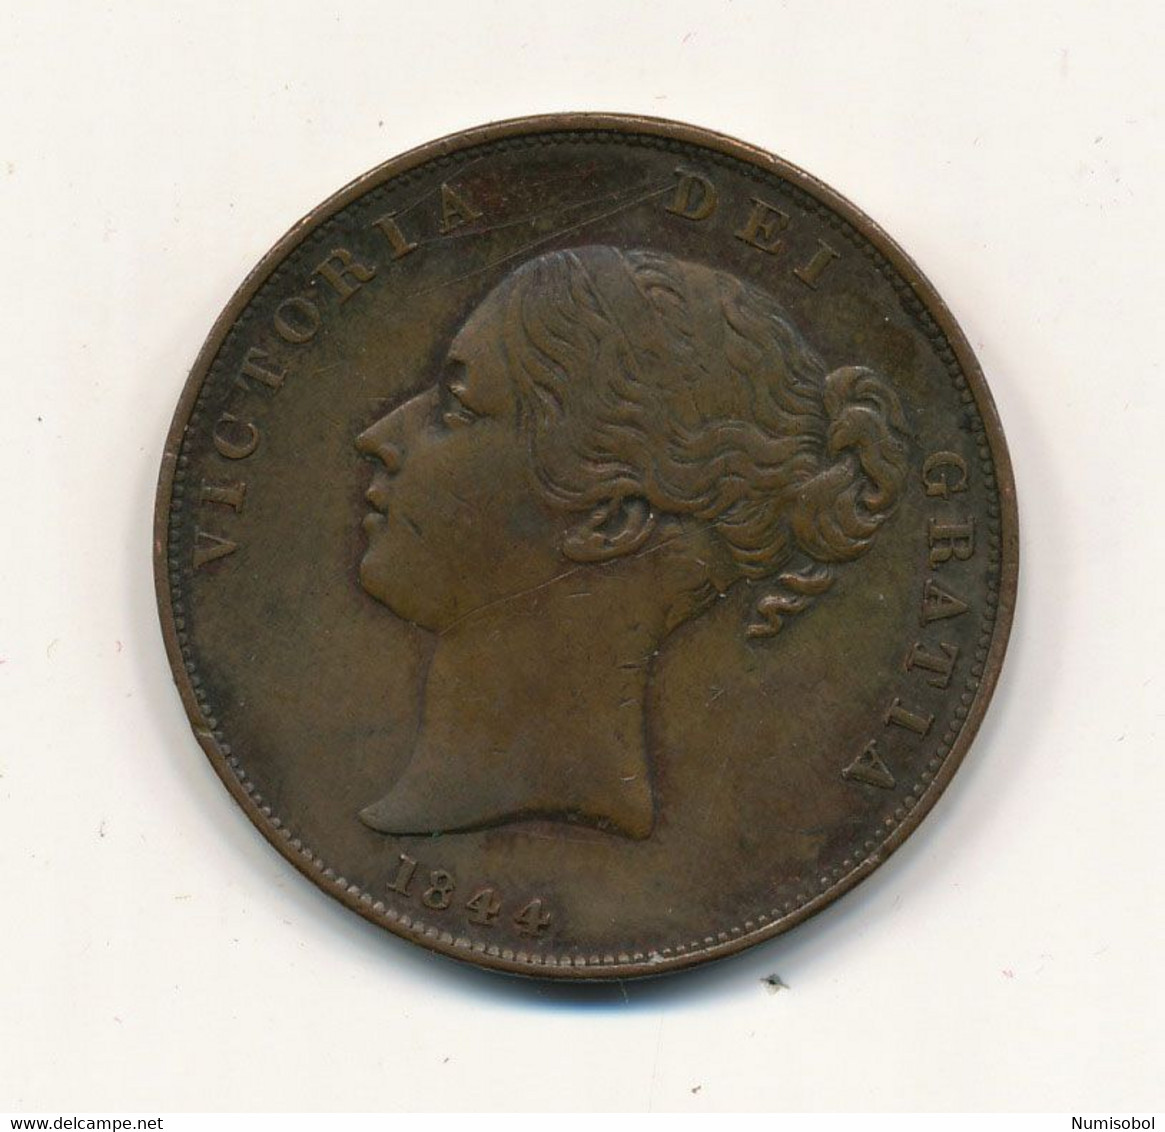 GREAT BRITAIN - 1 Penny 1844. (Victoria) High Quality. (GB021) - D. 1 Penny